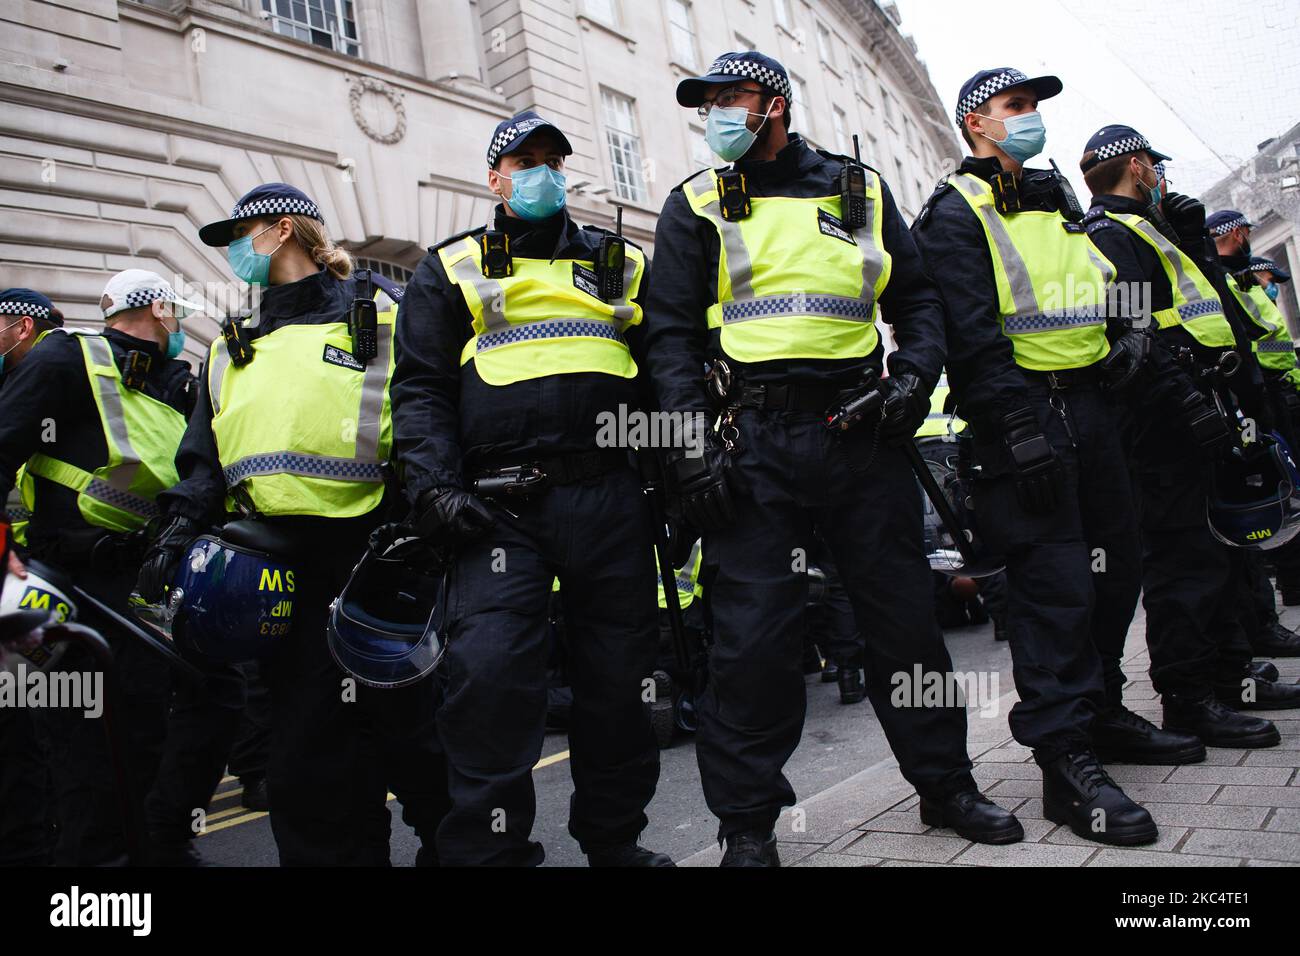 Police officers in riot gear form a cordon amid scuffles with activists on Regent Street during an anti-lockdown demonstration in London, England, on November 28, 2020. In an evening update the Metropolitan Police announced it had made 155 arrests over the course of the day's demonstrations, for offences including breaches of coronavirus regulations, assault on police and possession of drugs. London is to return to 'Tier 2' or 'high alert' covid-19 restrictions once the current England-wide coronavirus lockdown ends next Wednesday. All three of the tiers, assigned to local authorities across E Stock Photo